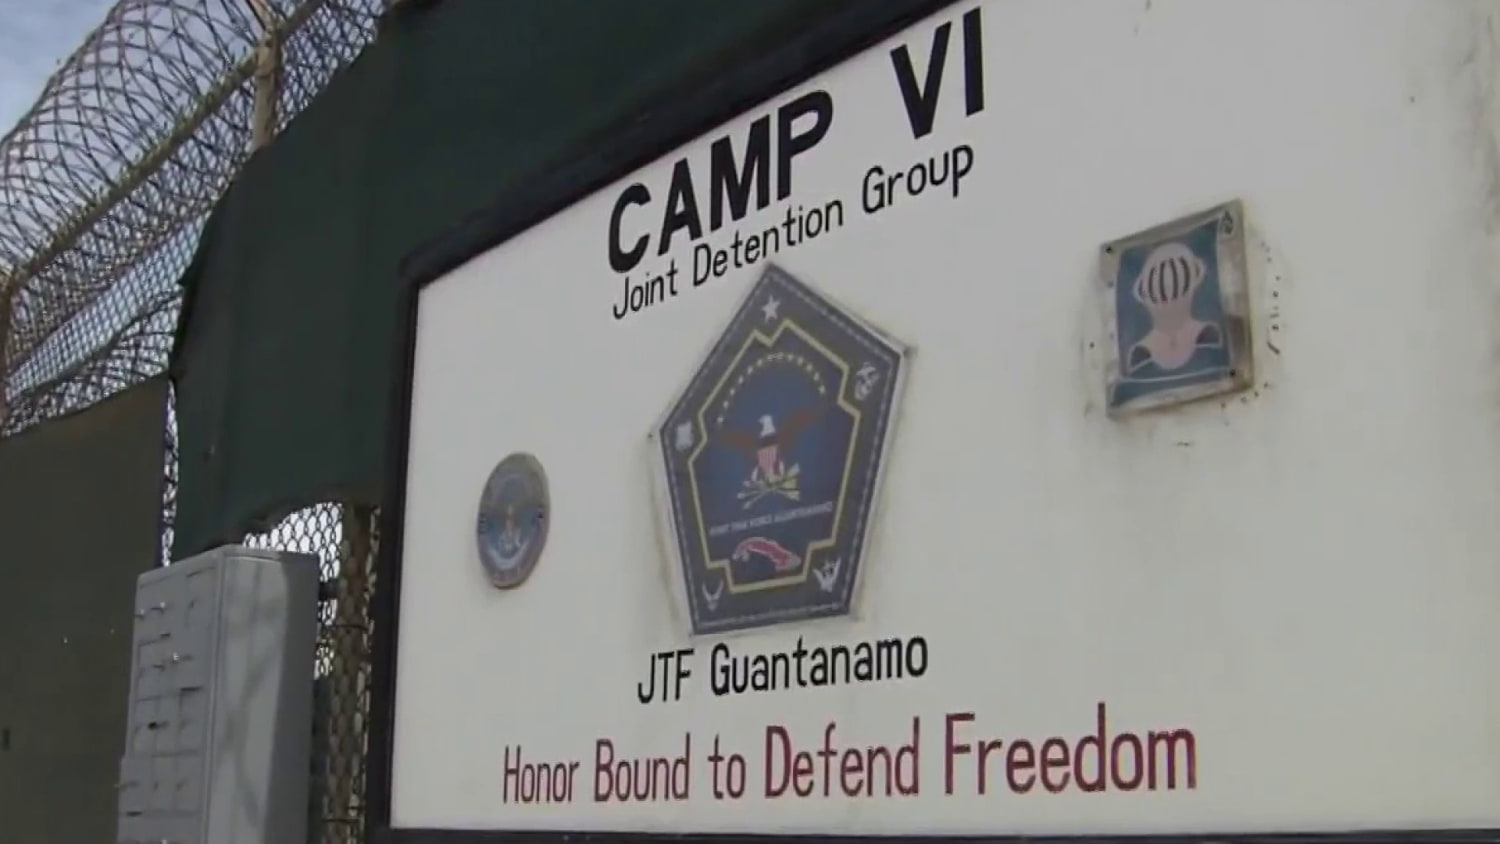 U.S. abruptly halts plan to transfer 11 detainees from Guantanamo days after Oct. 7th attack